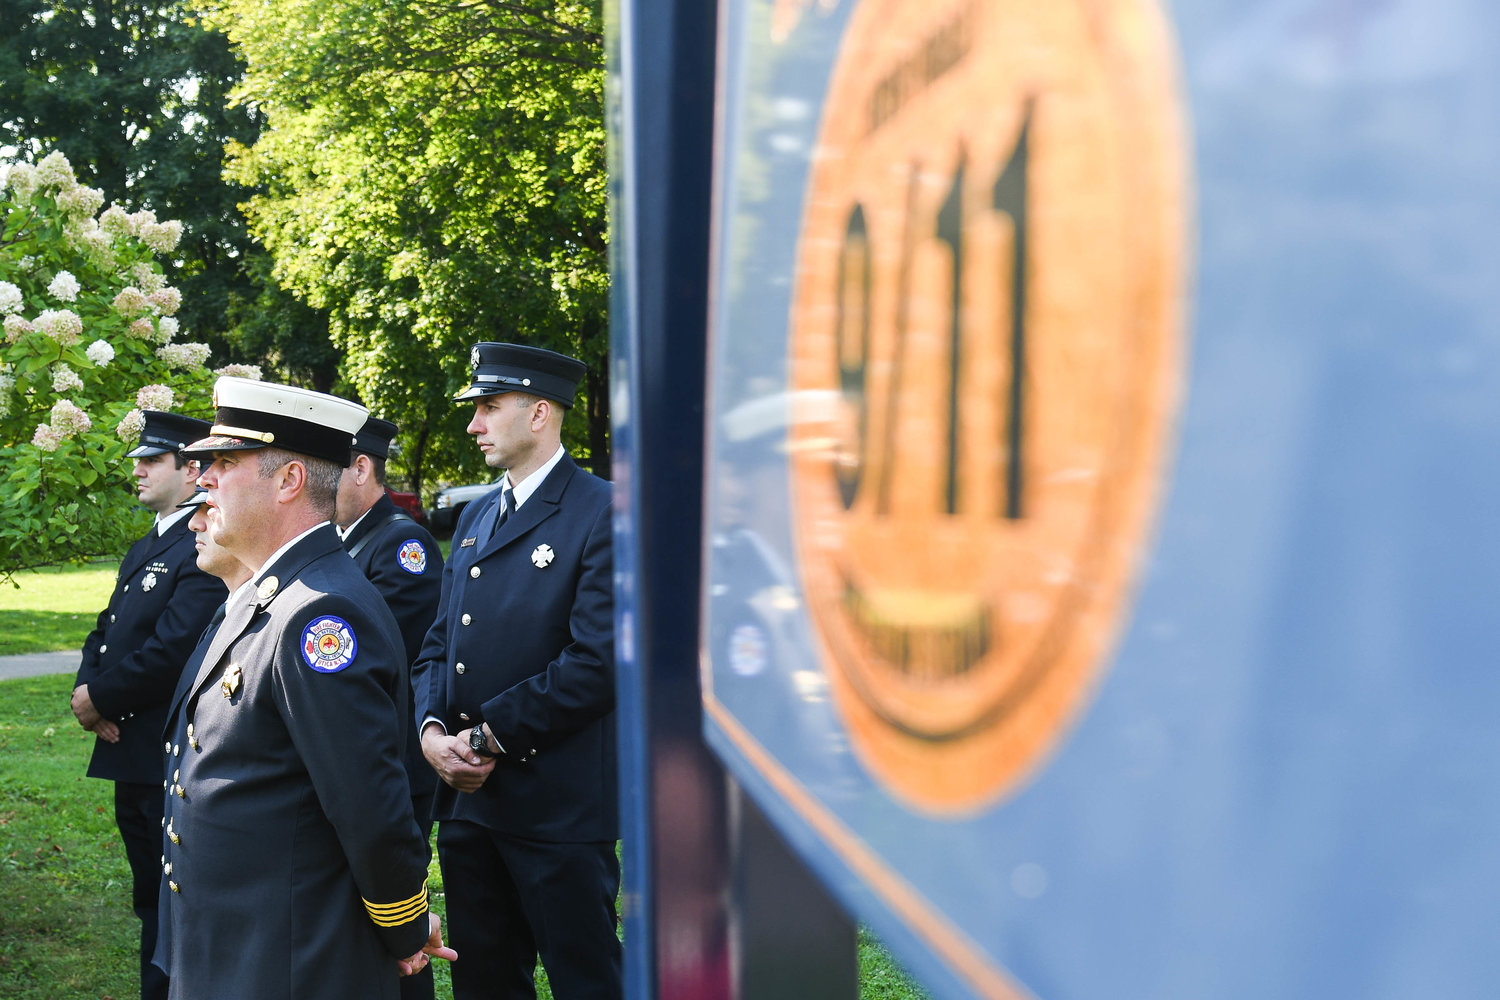 Utica firefighters attend the annual 9/11 Remembrance Ceremony on Friday morning at the 9/11 Memorial in Utica.